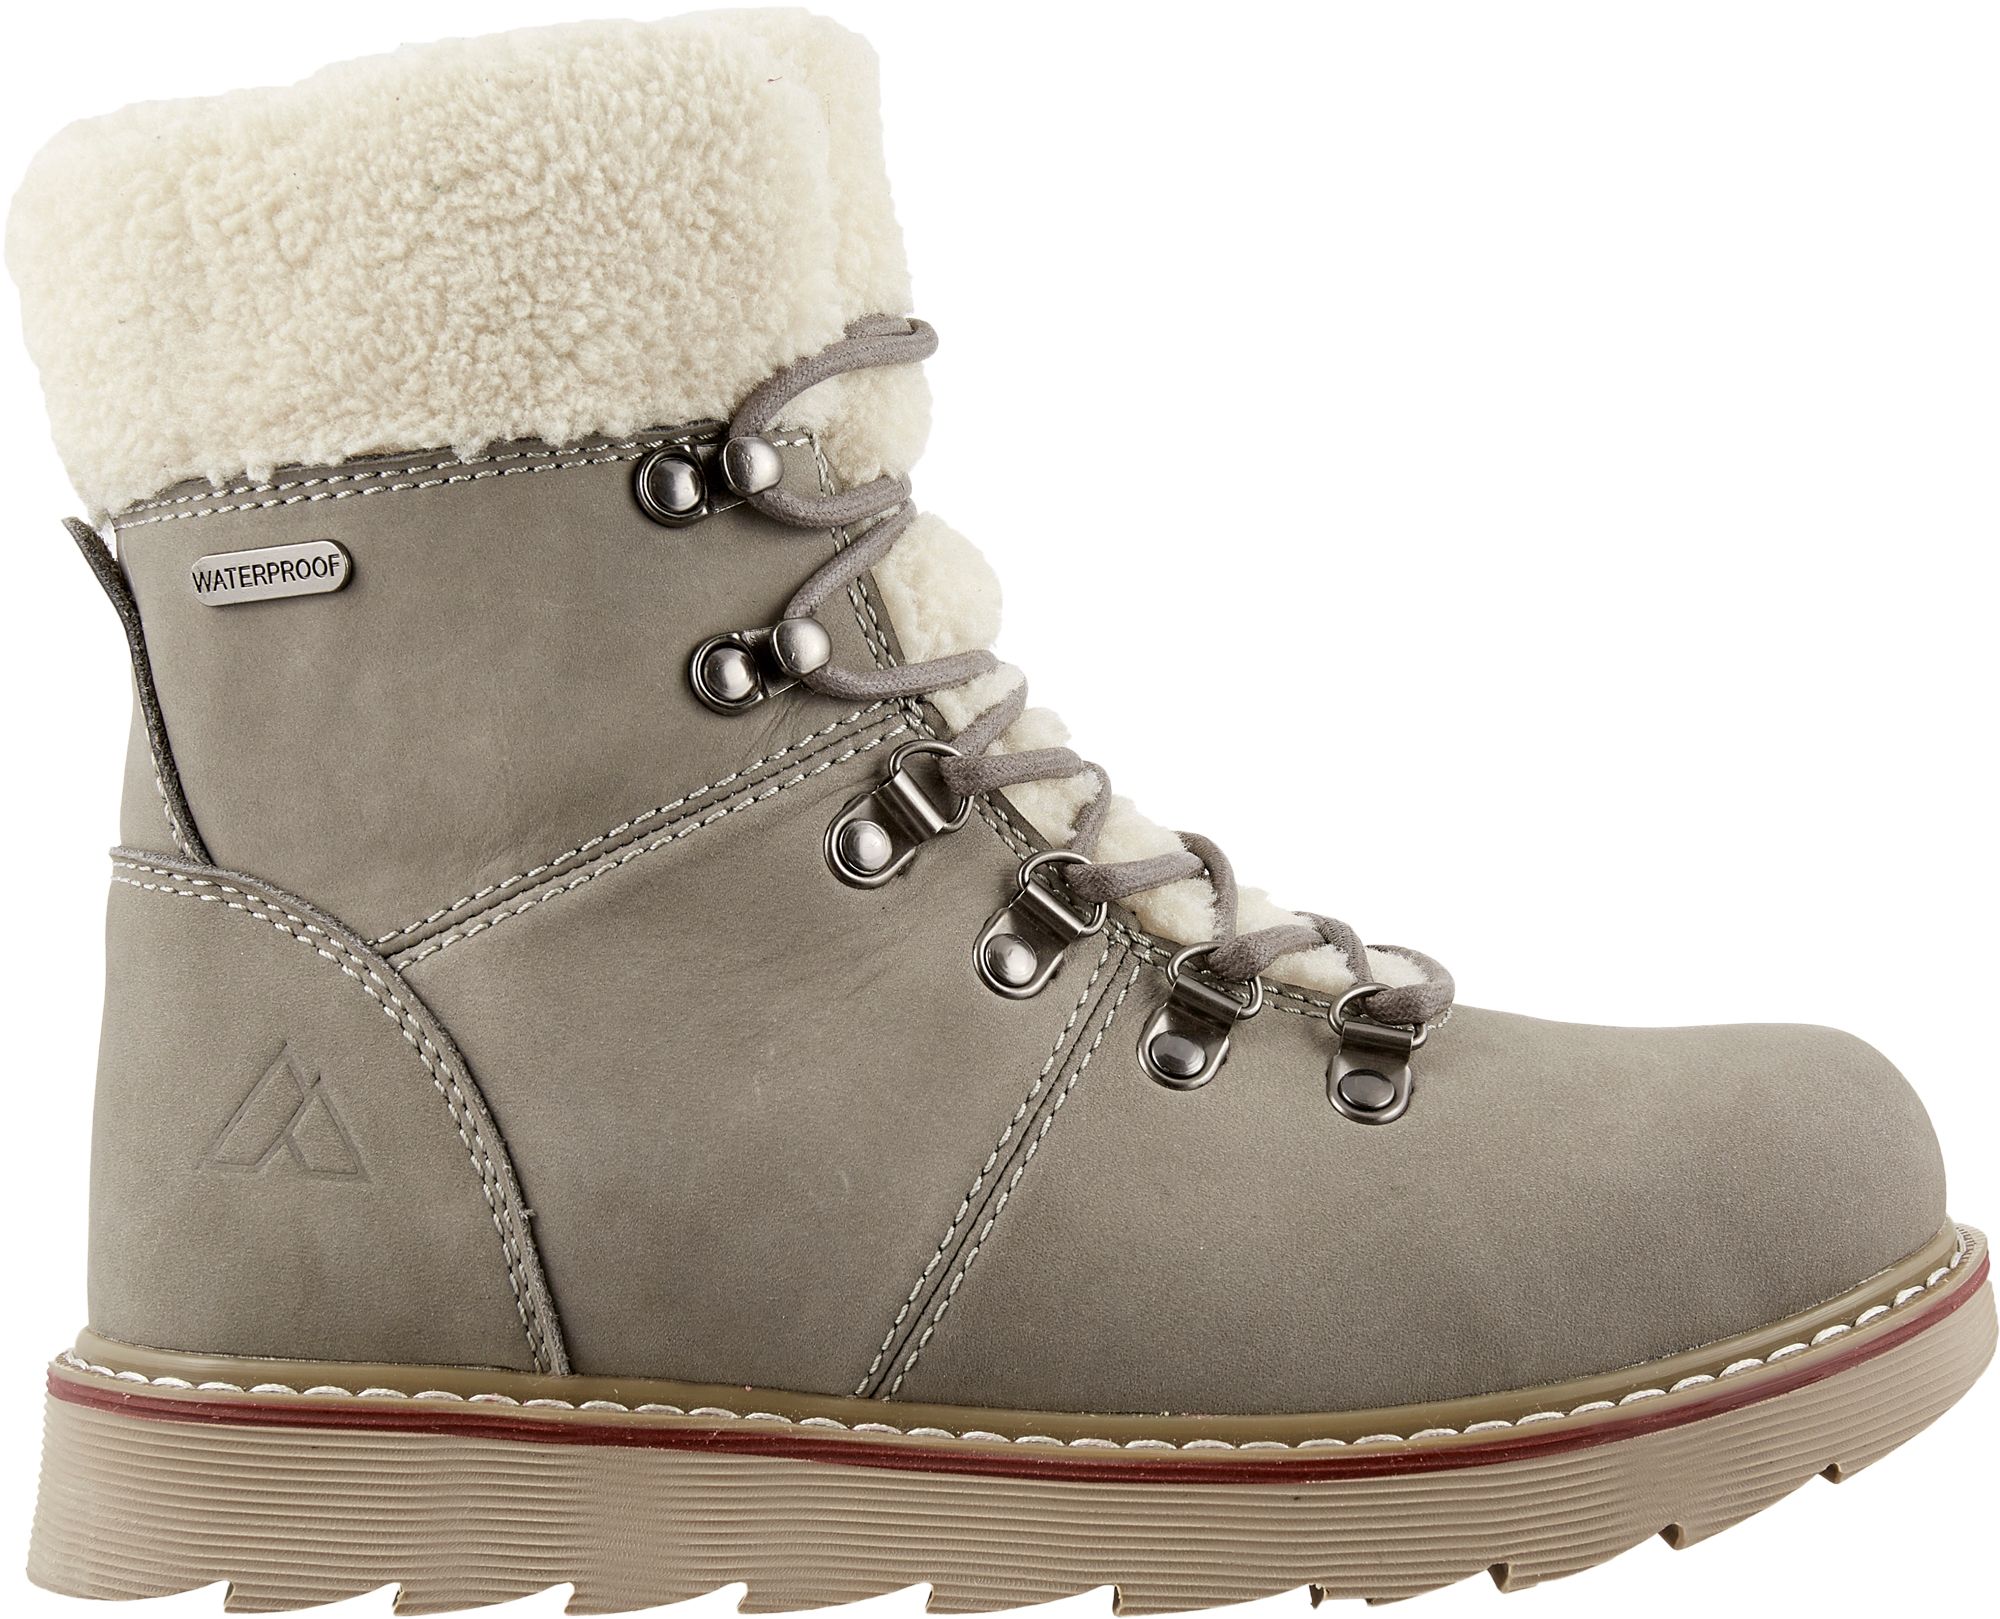 Women's Winter Boots & Snow Boots | Best Price Guarantee at DICK'S